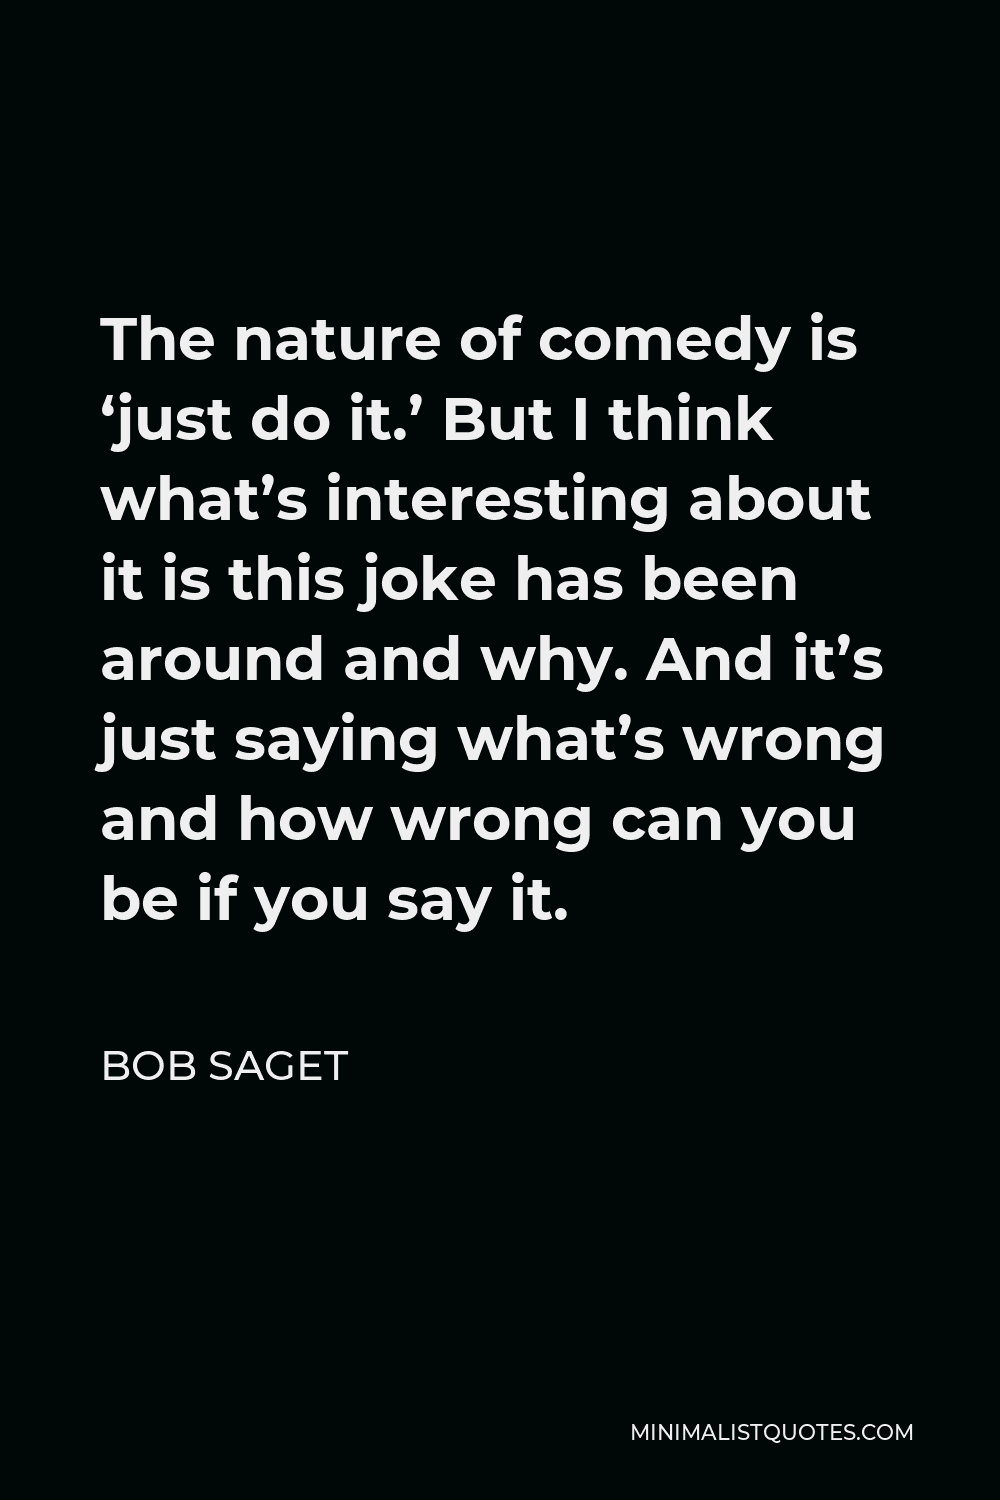 Bob Saget Quote - The nature of comedy is ‘just do it.’ But I think what’s interesting about it is this joke has been around and why. And it’s just saying what’s wrong and how wrong can you be if you say it.